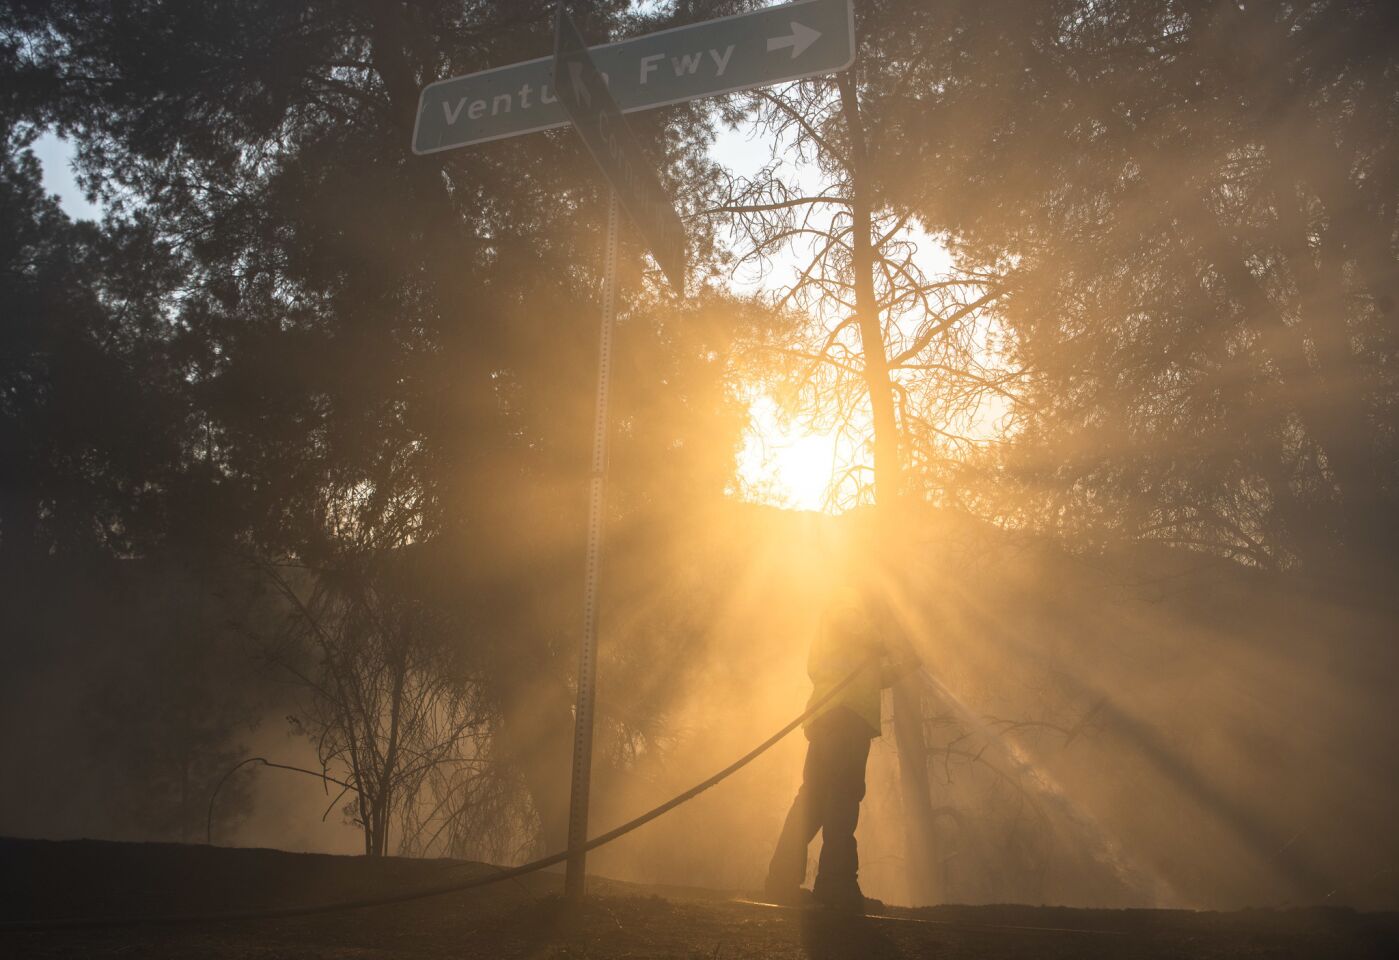 A Southern California Edison employee hoses down a hot spot off Kanan Road on Nov. 10. The crew was checking for hot spots around power lines.